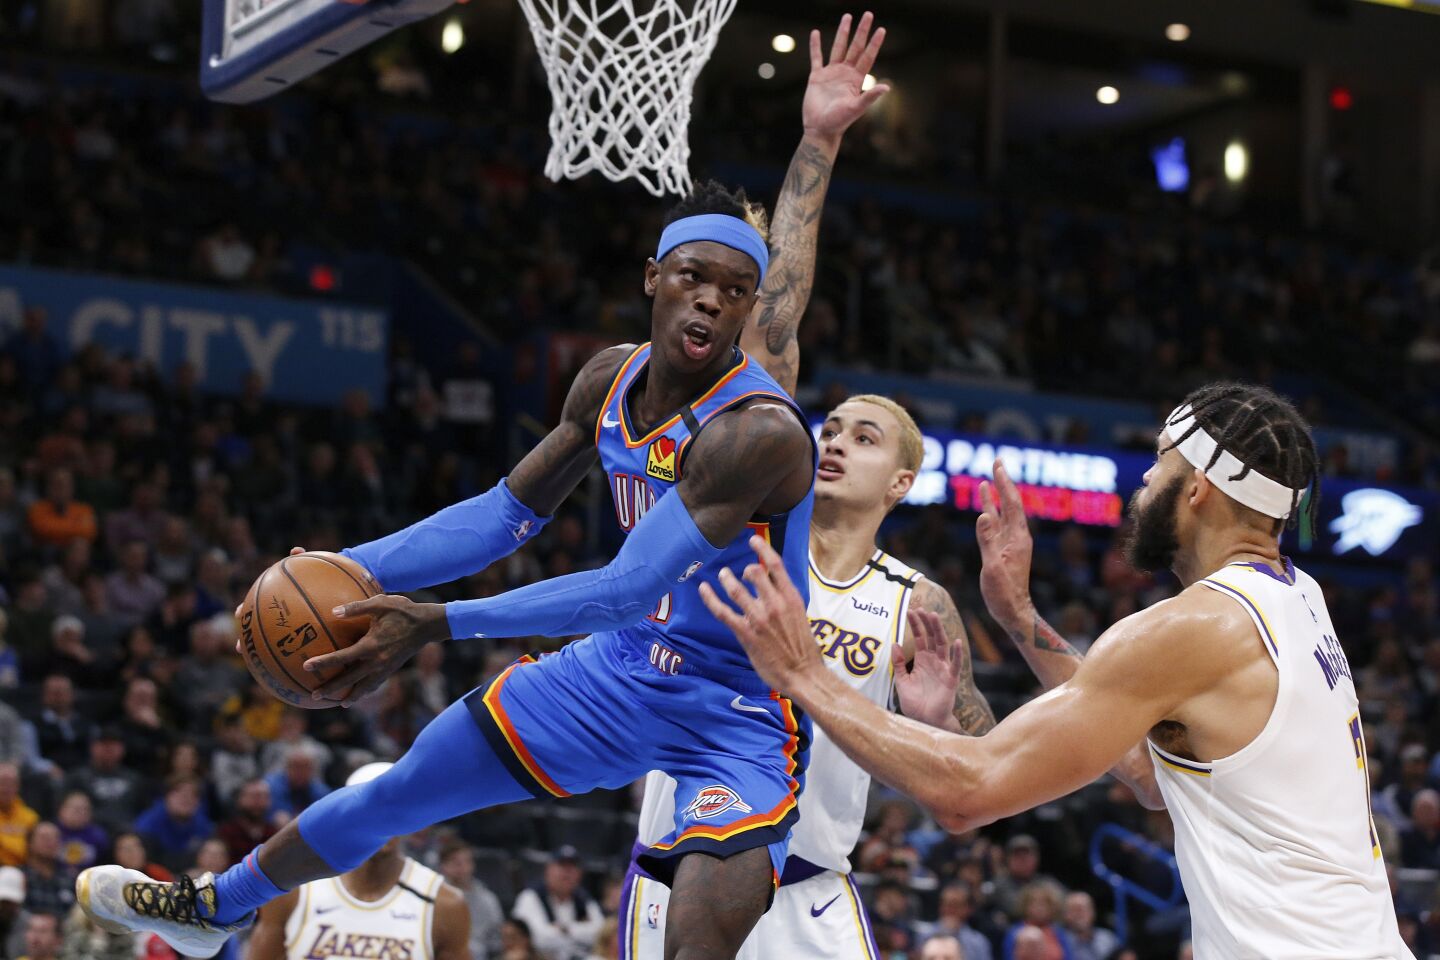 Thunder guard Dennis Schroder passes from under the basket during a game against the Lakers on Jan. 11 at Chesapeake Energy Arena.